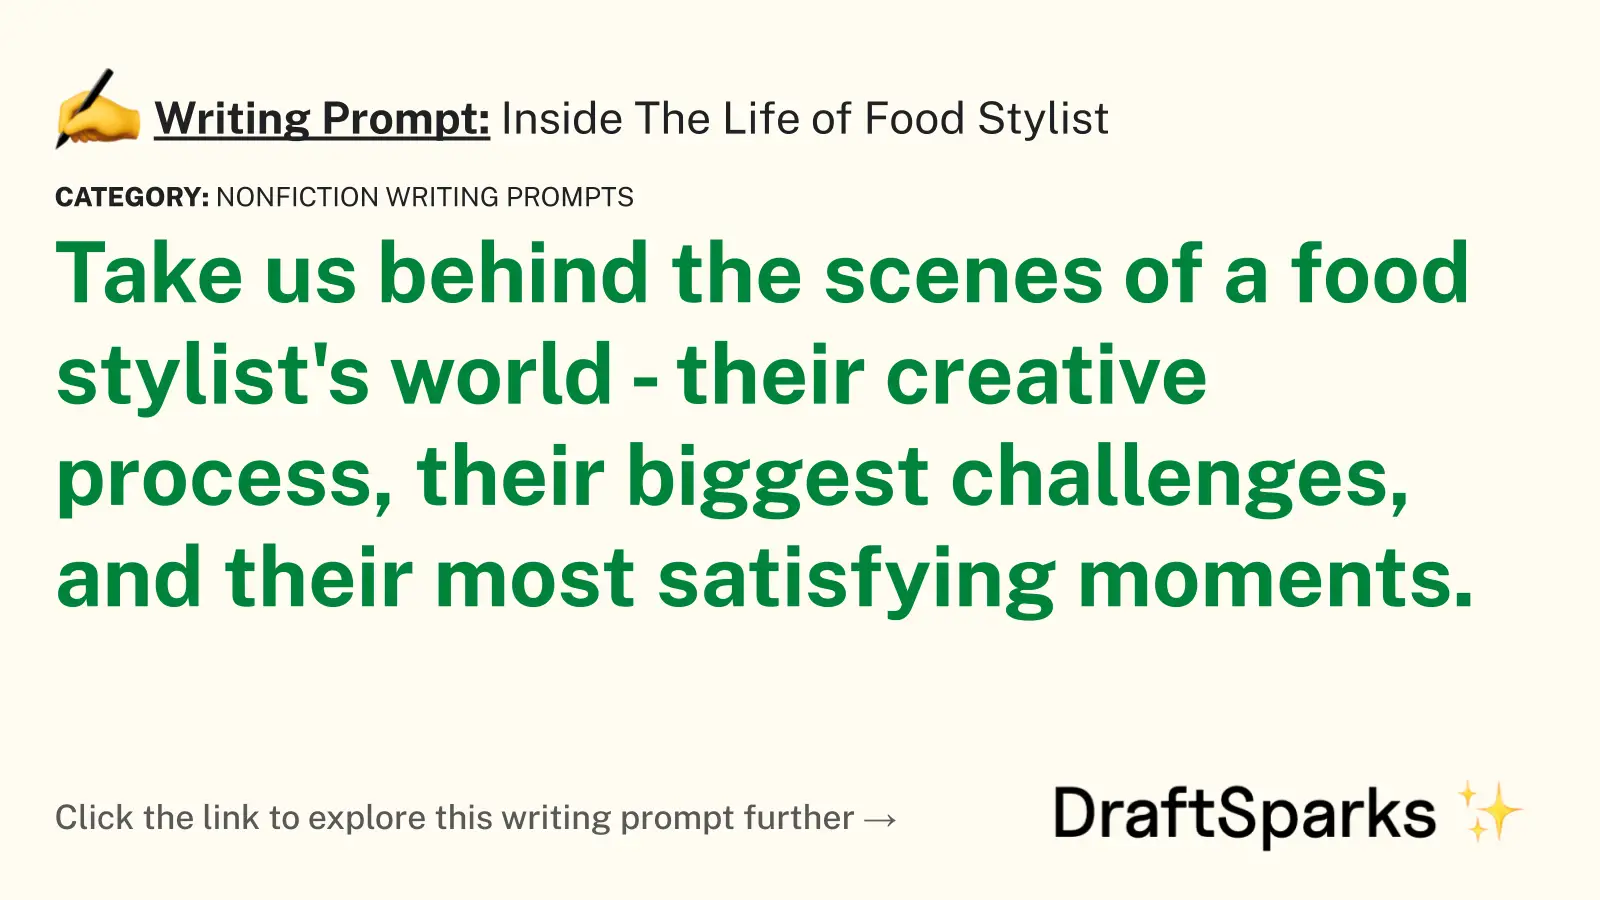 Inside The Life of Food Stylist